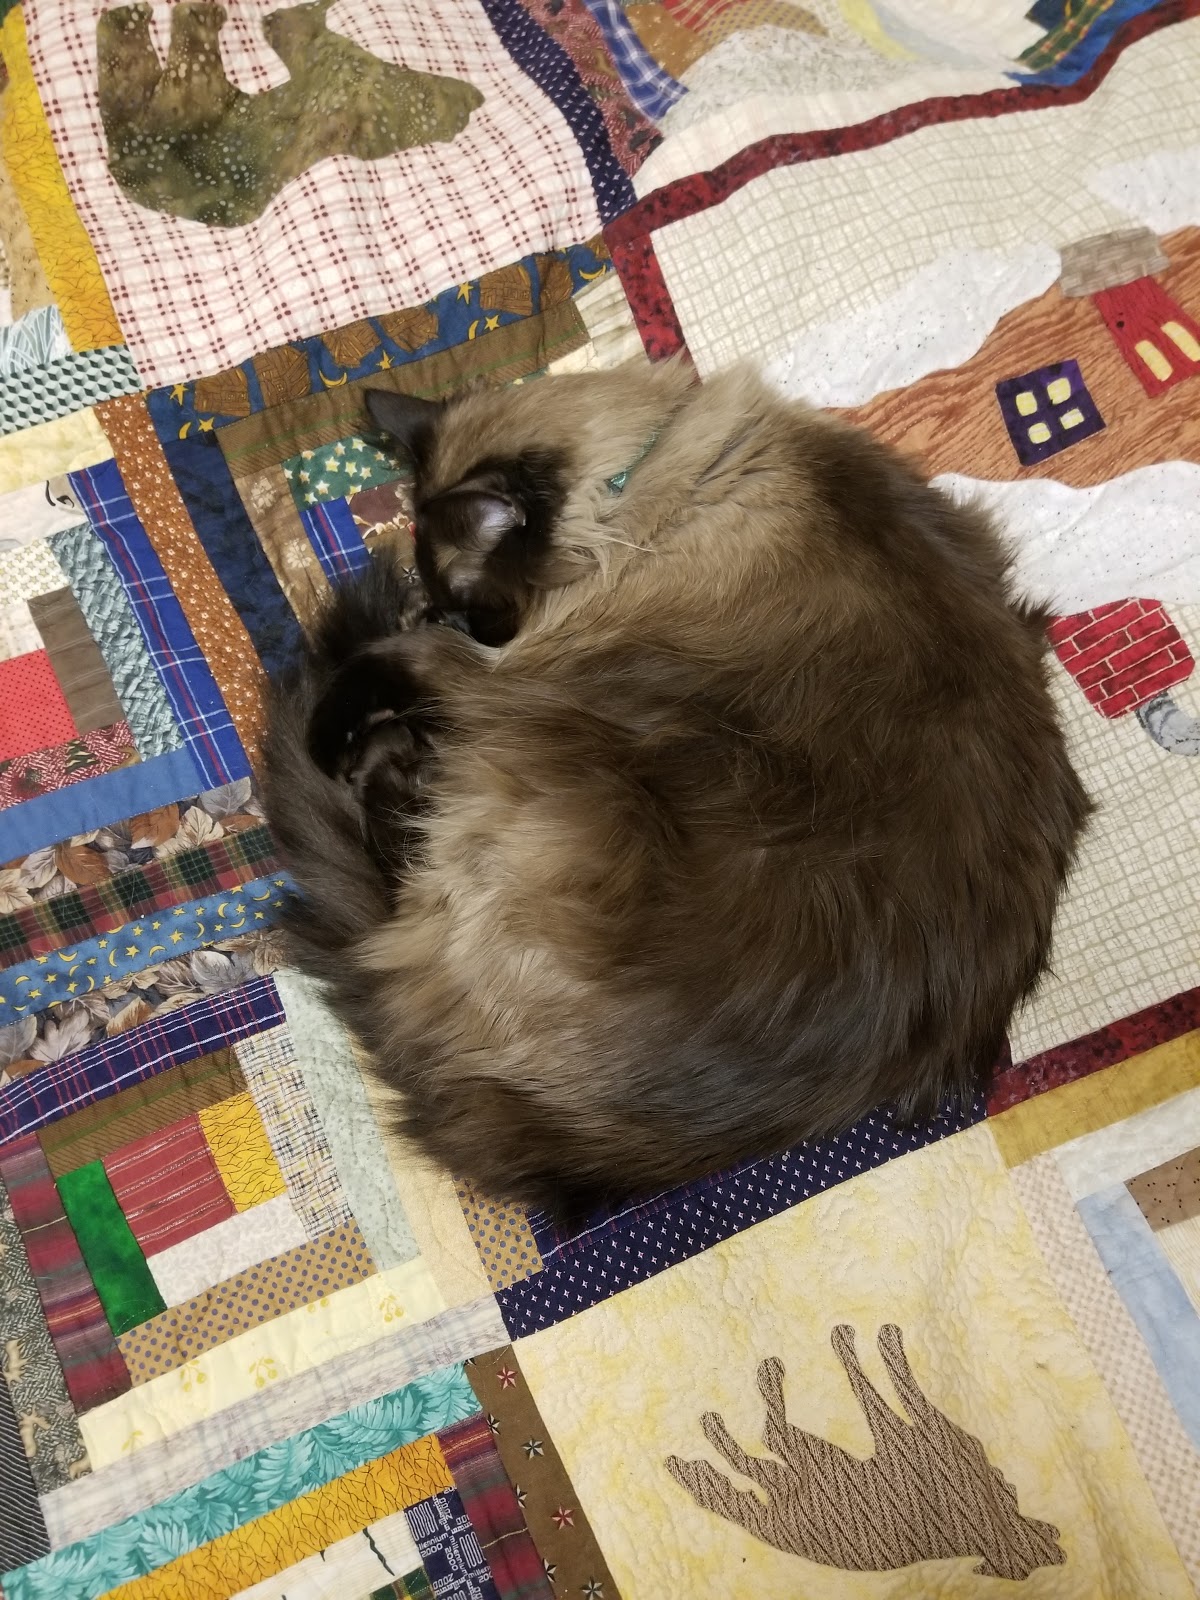 a cat contentedly curled up enjoying a nap on a bedspread